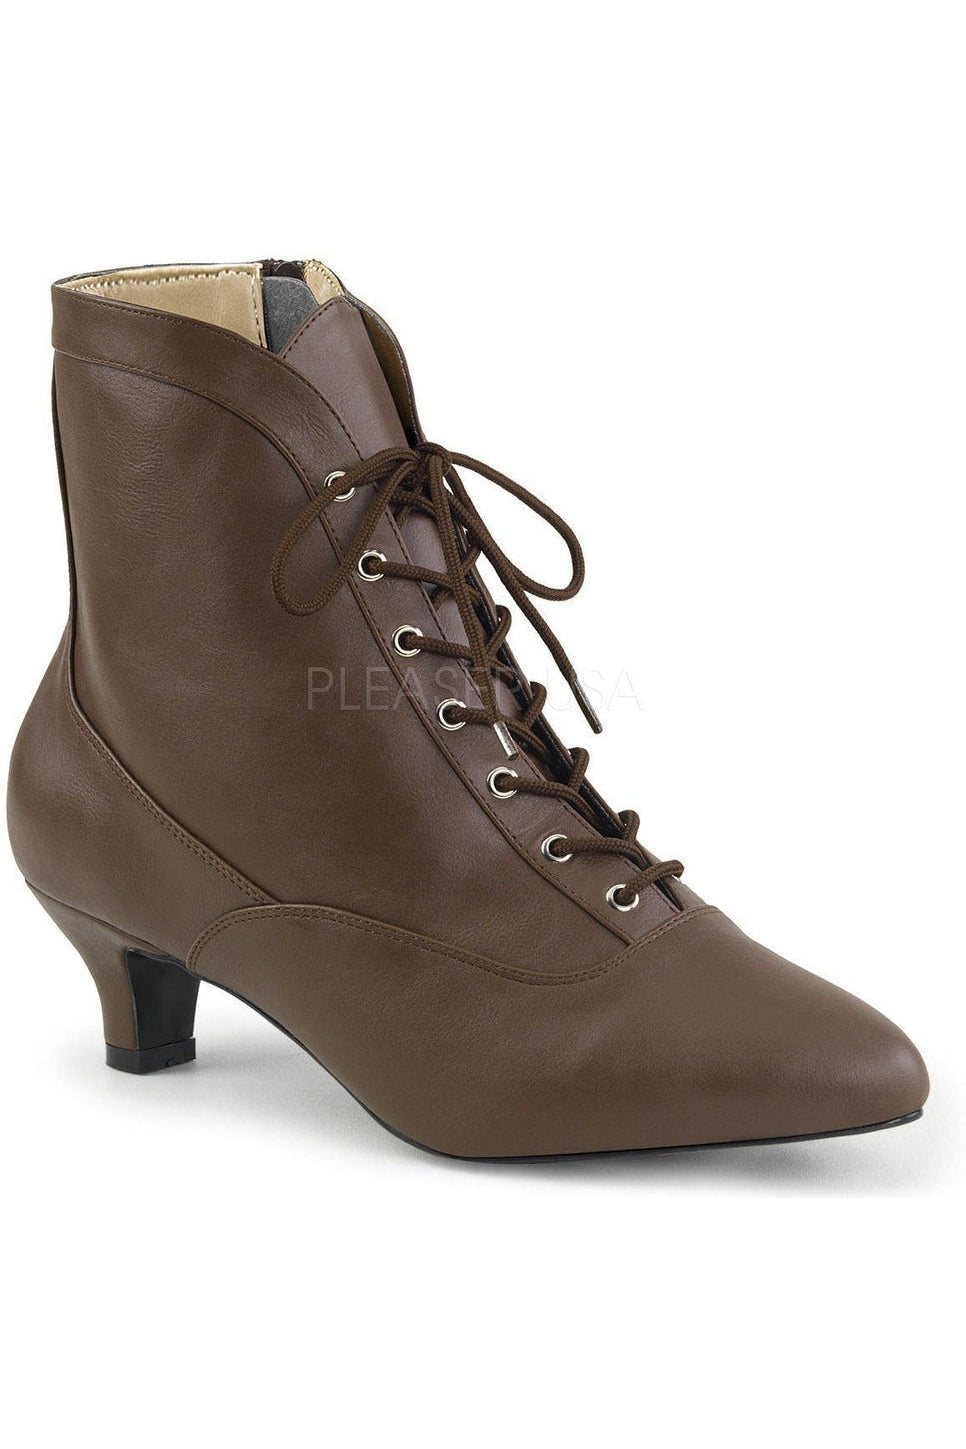 FAB-1005 Ankle Boot | Brown Faux Leather-Pleaser Pink Label-Brown-Ankle Boots-SEXYSHOES.COM